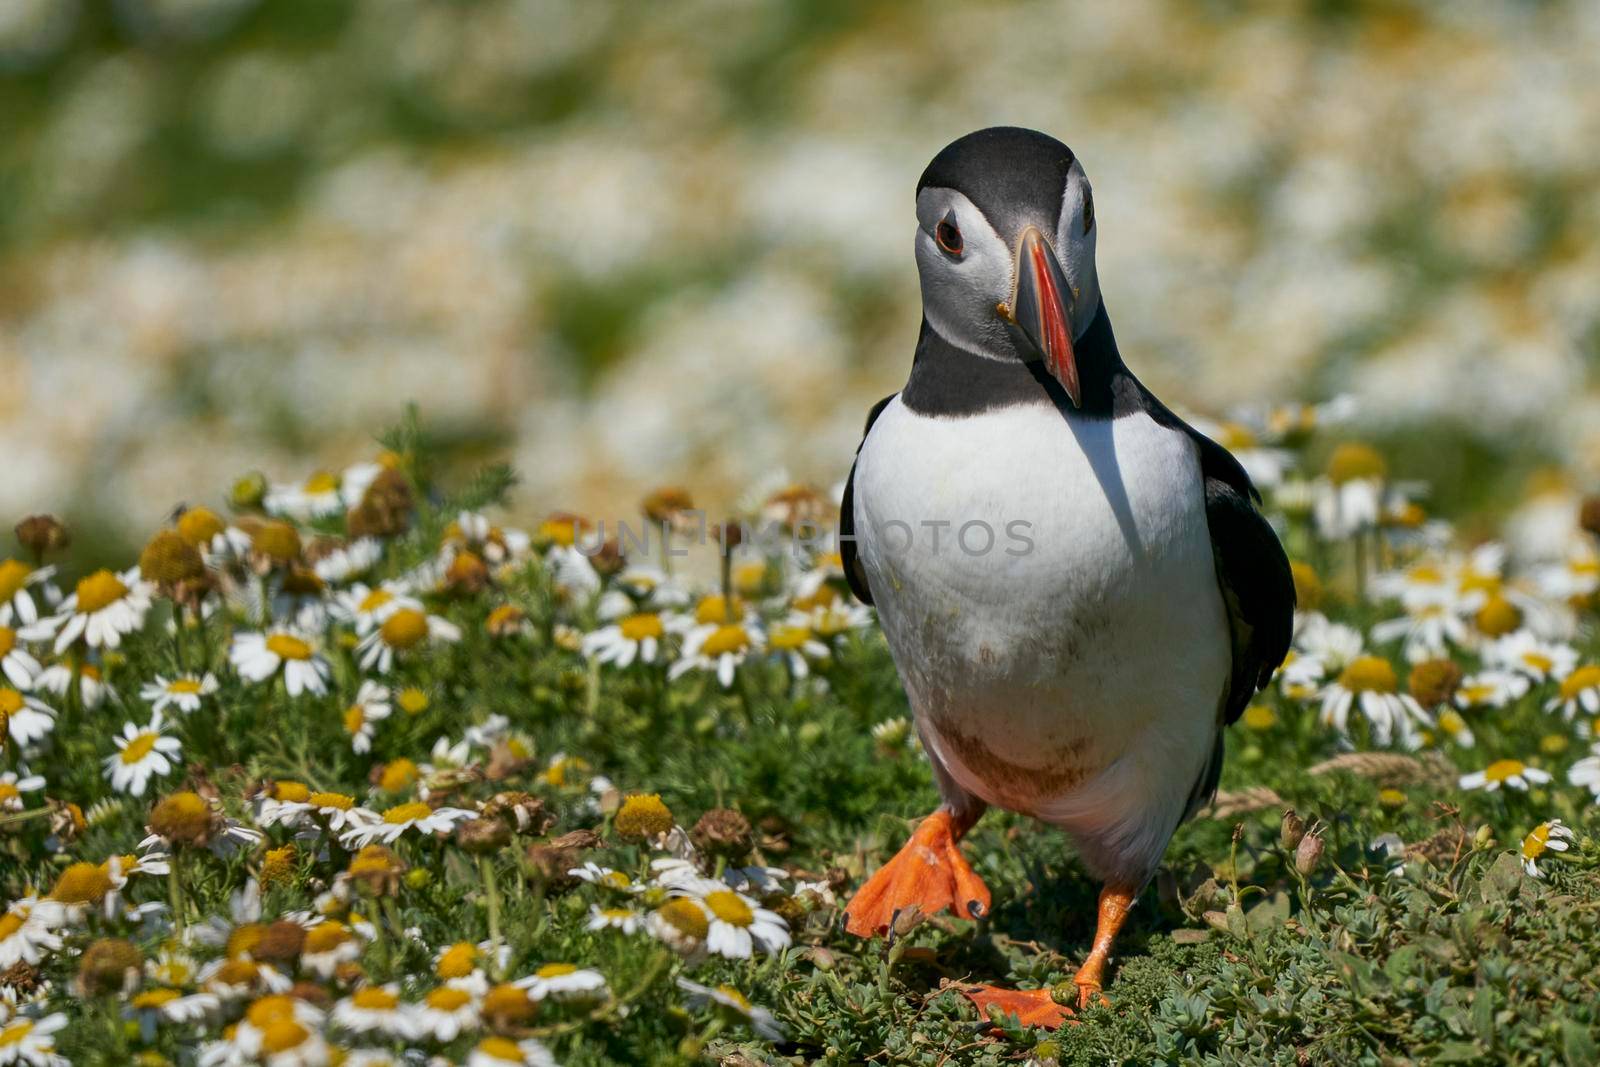 Puffin among summer flowers by JeremyRichards